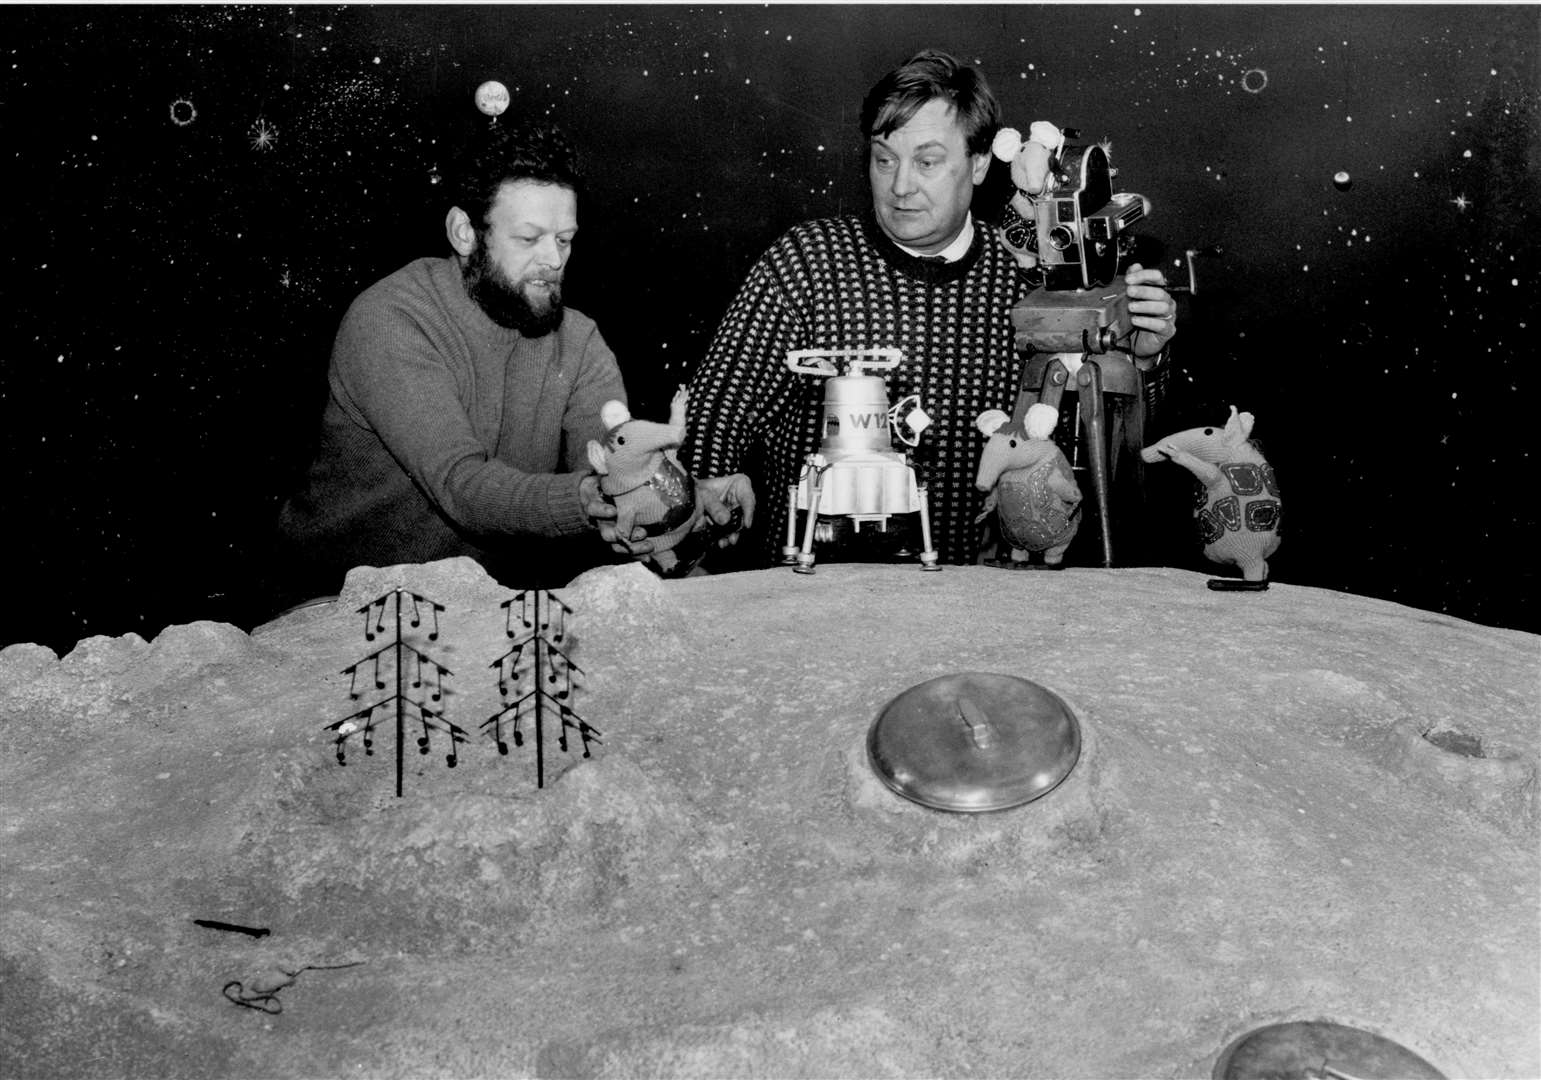 Peter Firmin (left) and Oliver Postgate at work on the children's TV Programme The Clangers in their Blean studio in November 1969